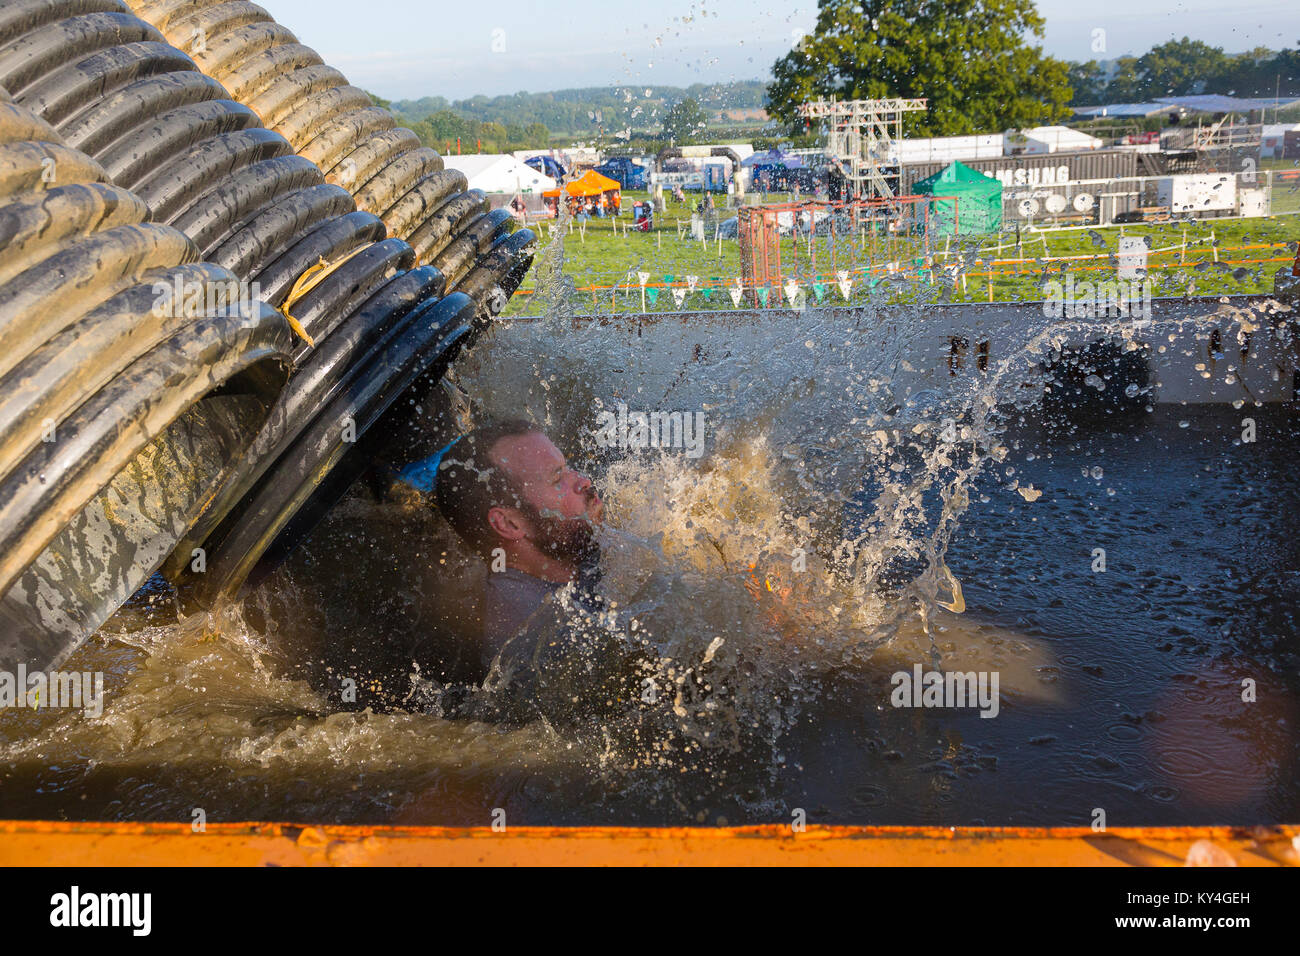 Sussex, UK. A male competitor closes his eyes as he splashes into a large pool of freezing cold water during a Tough Mudder event. Stock Photo